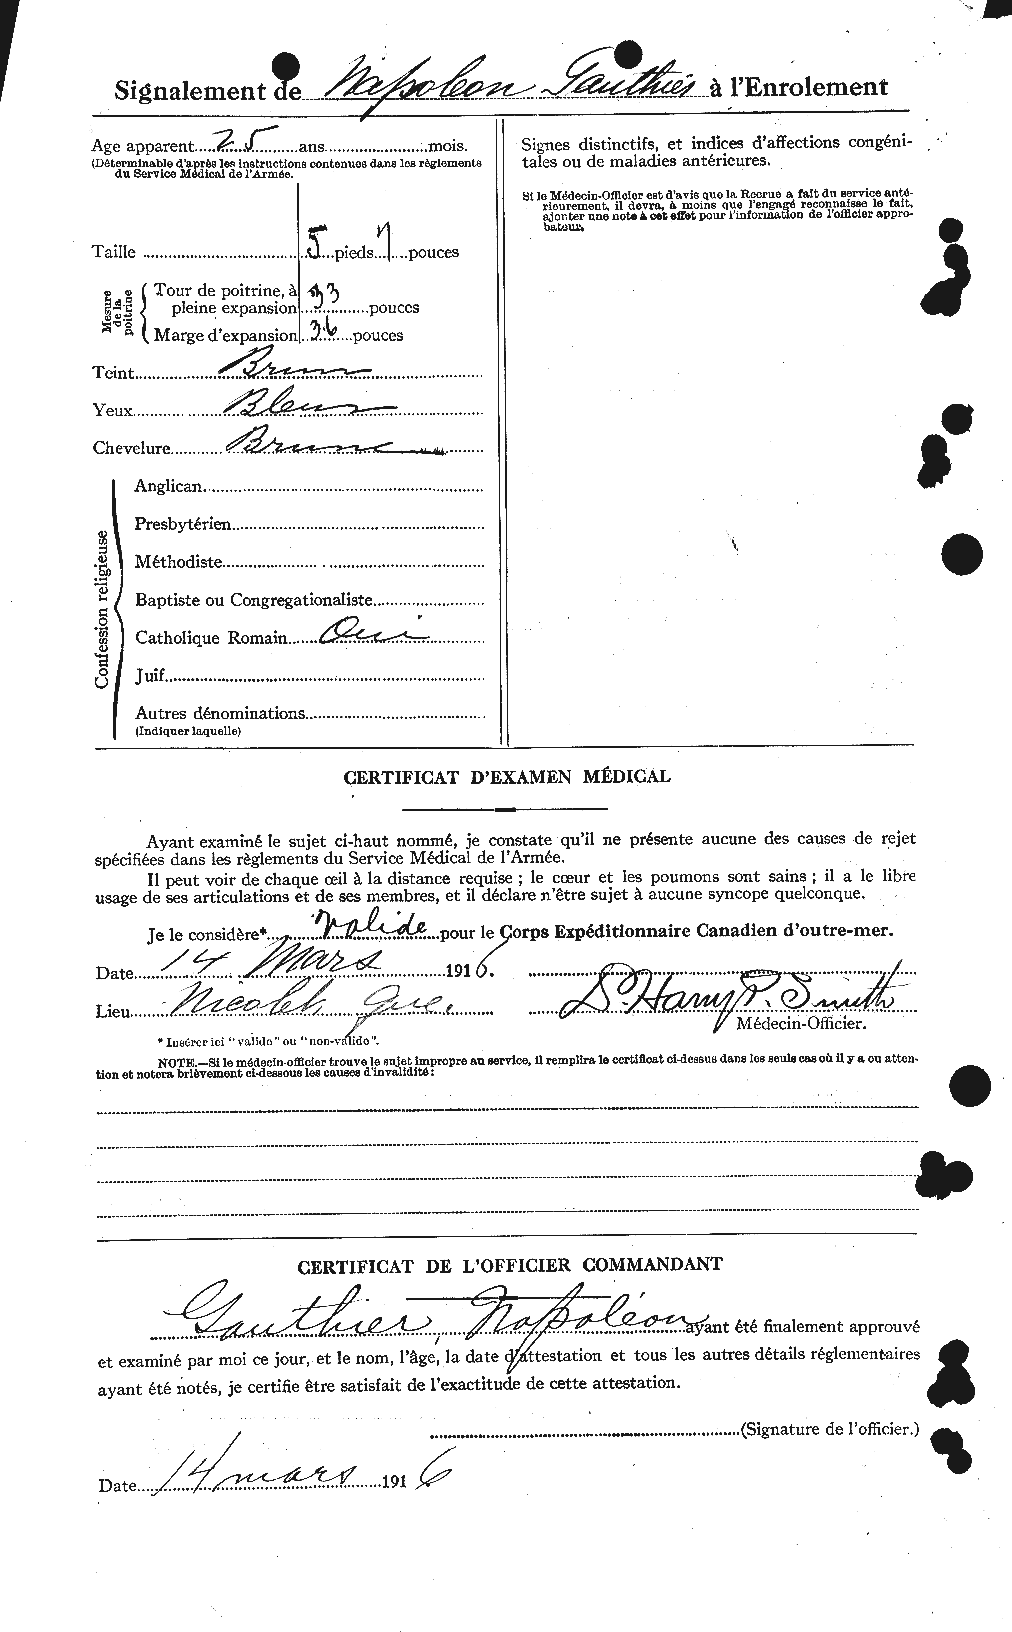 Personnel Records of the First World War - CEF 342948b